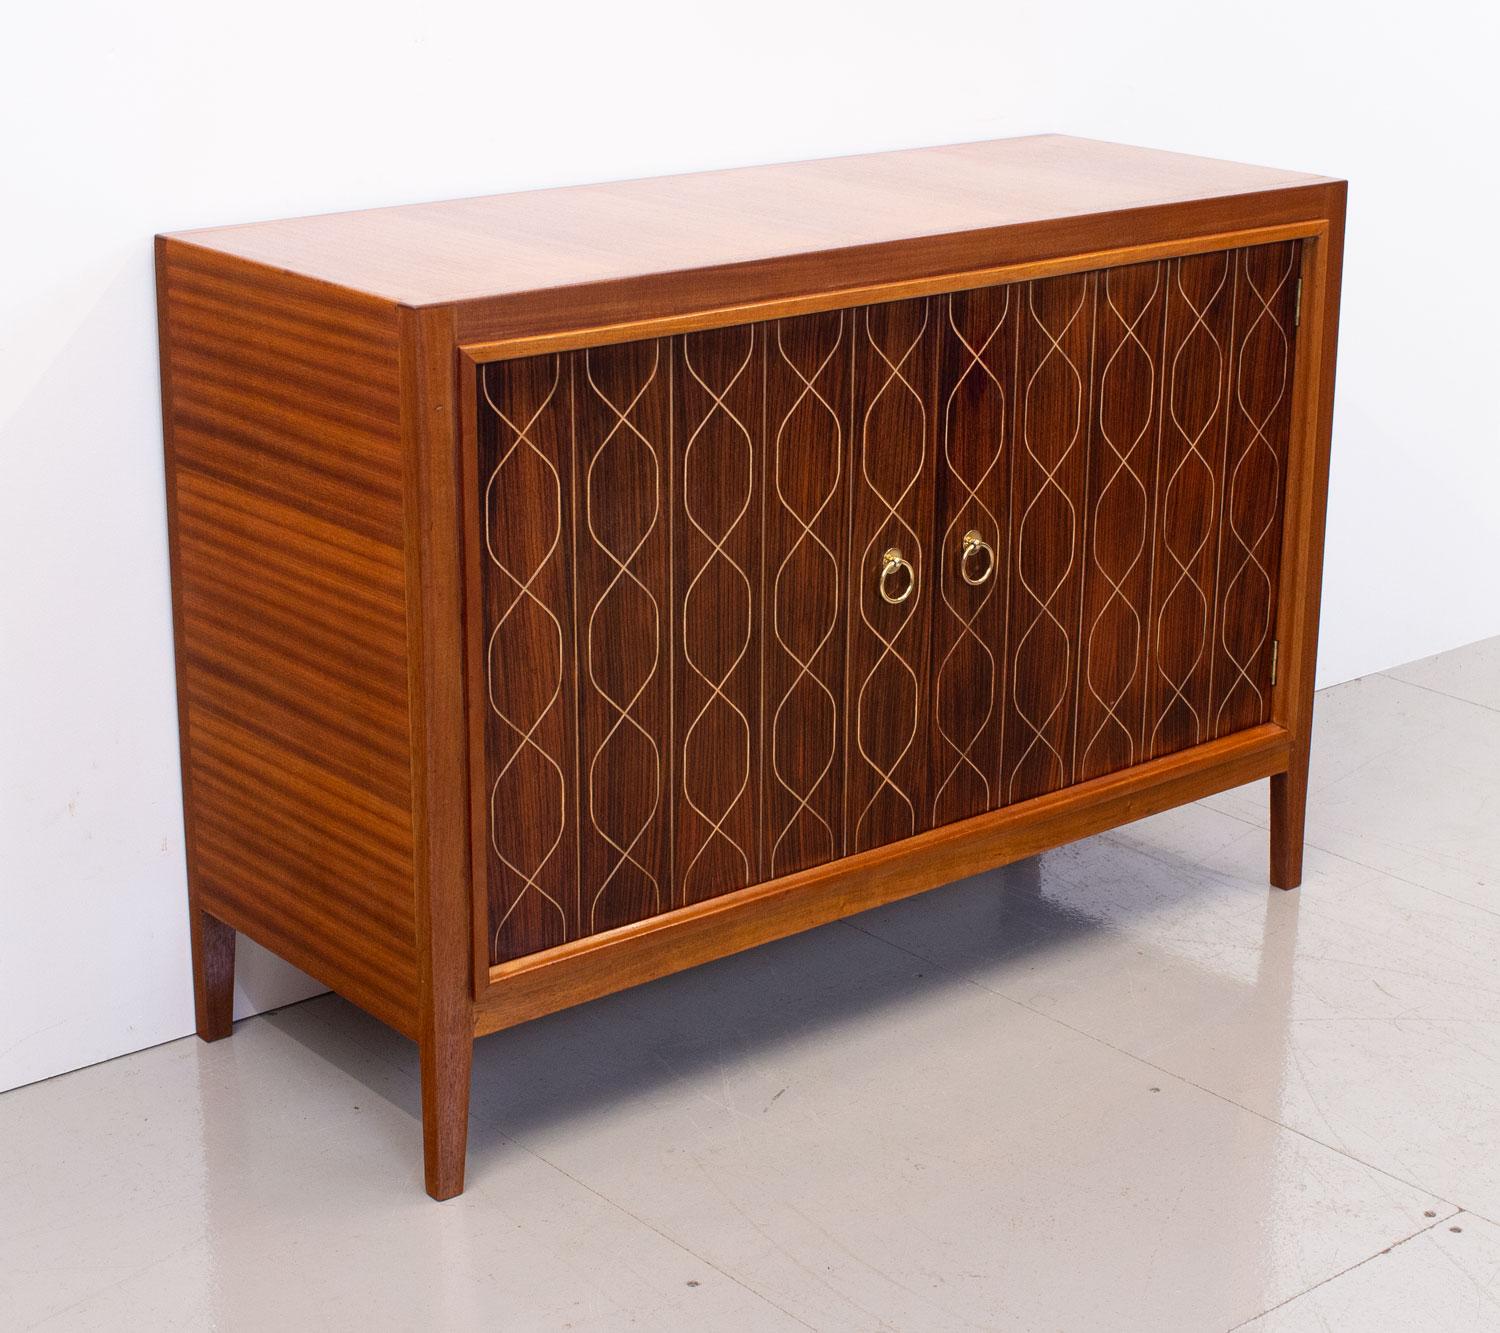 Varnished Double Helix Rosewood Sideboard by Gordon Russell, 1950s